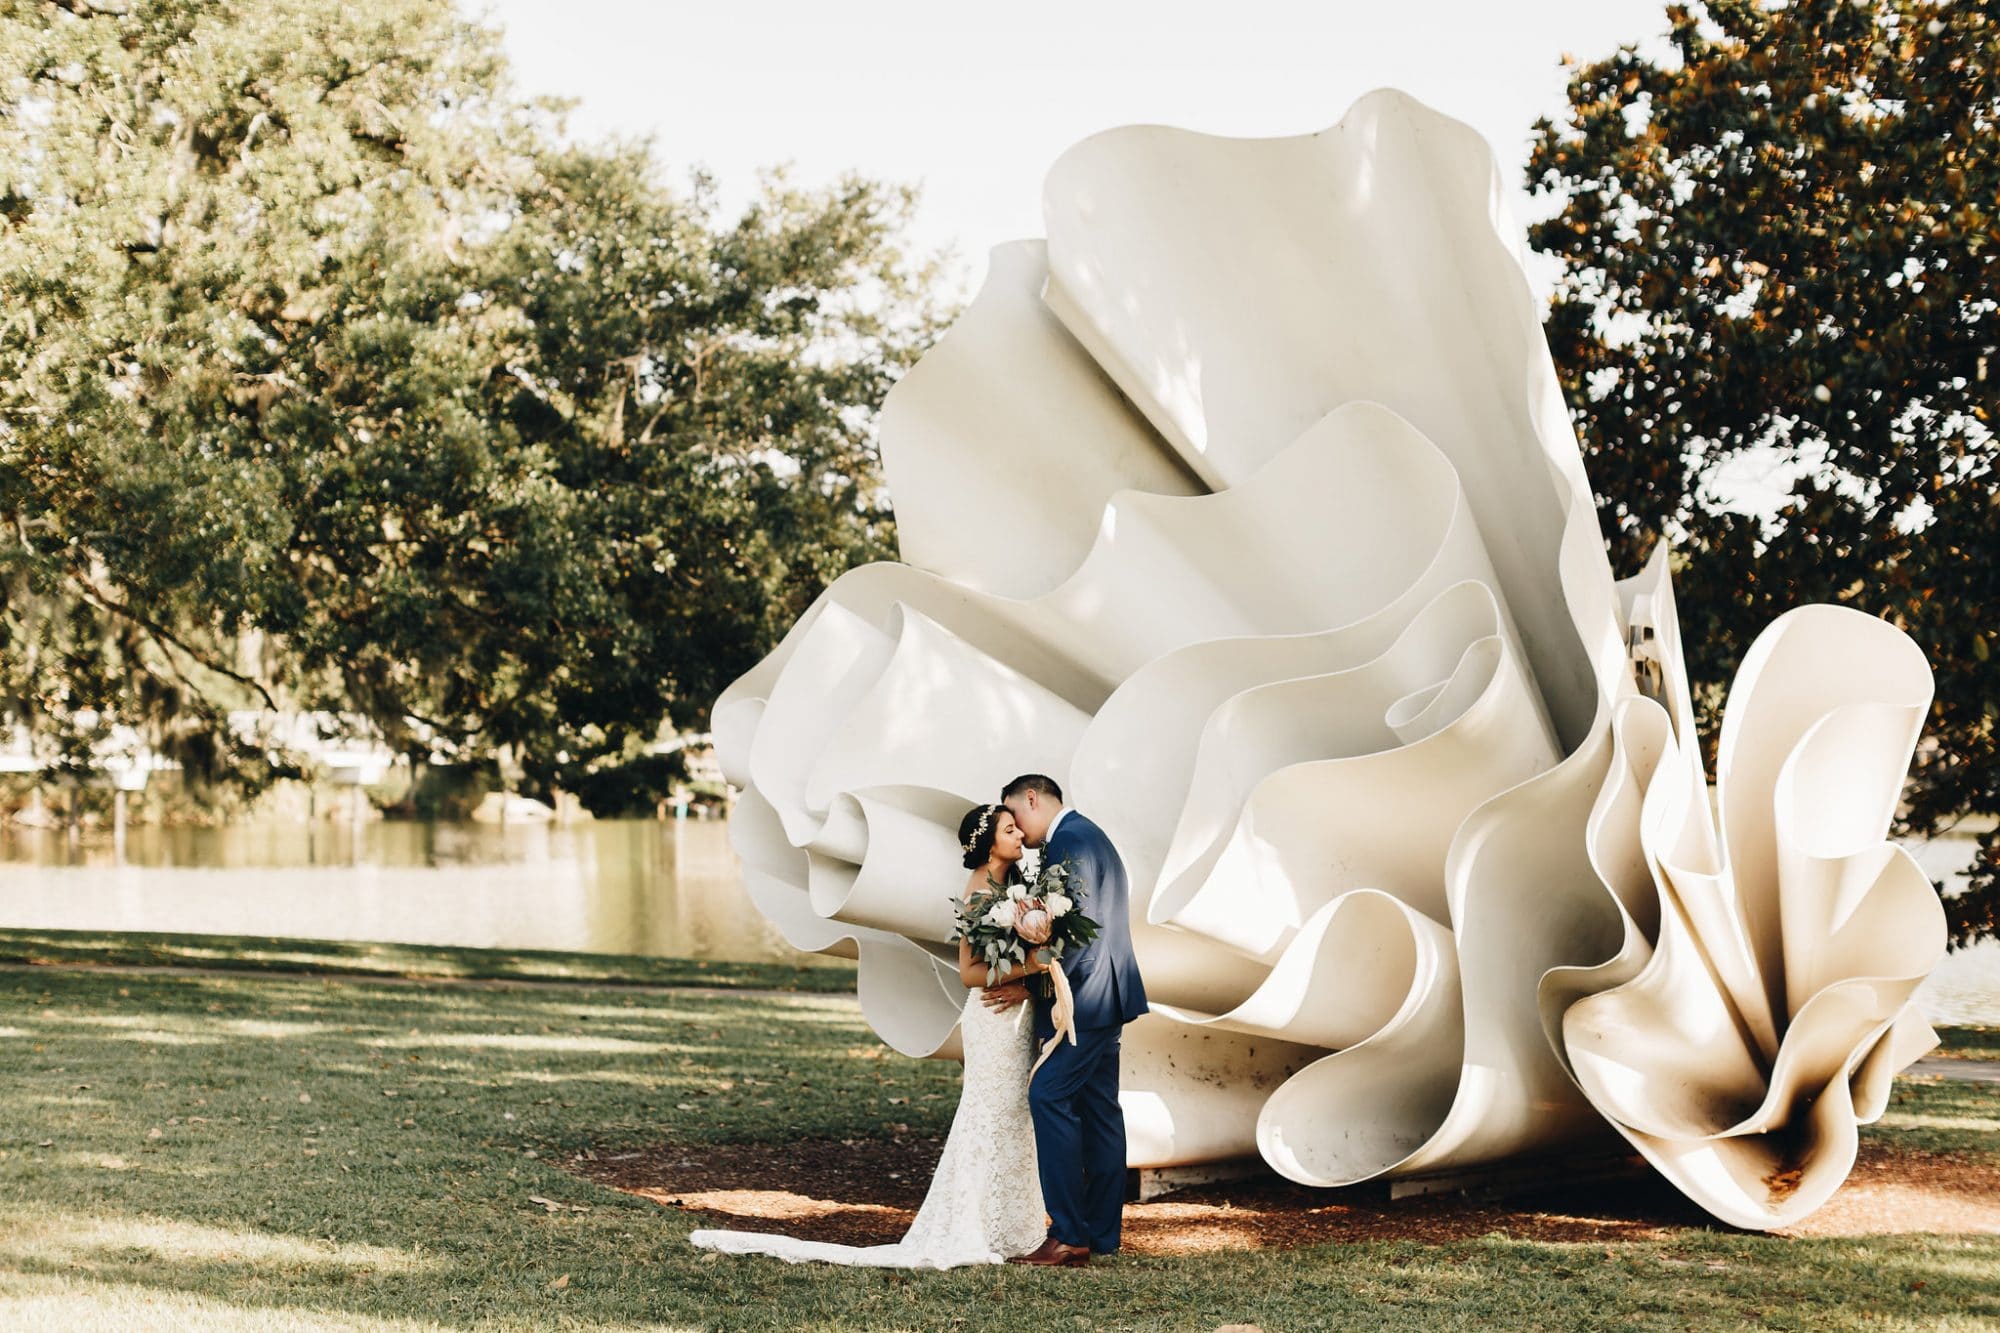 Mennello Museum of American Art - bride and groom kissing beside large outdoor sculpture